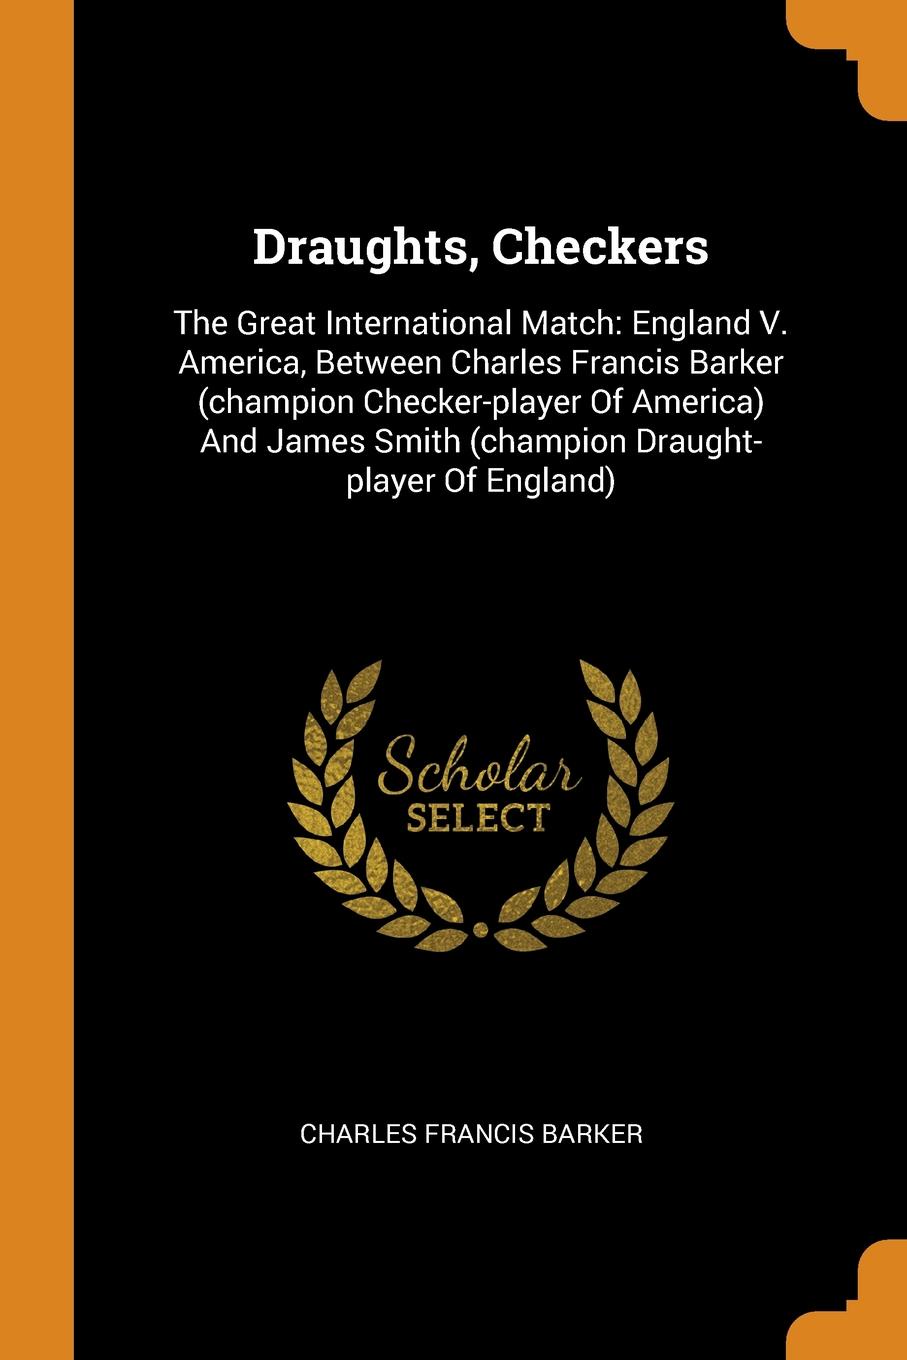 Draughts, Checkers. The Great International Match: England V. America, Between Charles Francis Barker (champion Checker-player Of America) And James Smith (champion Draught-player Of England)